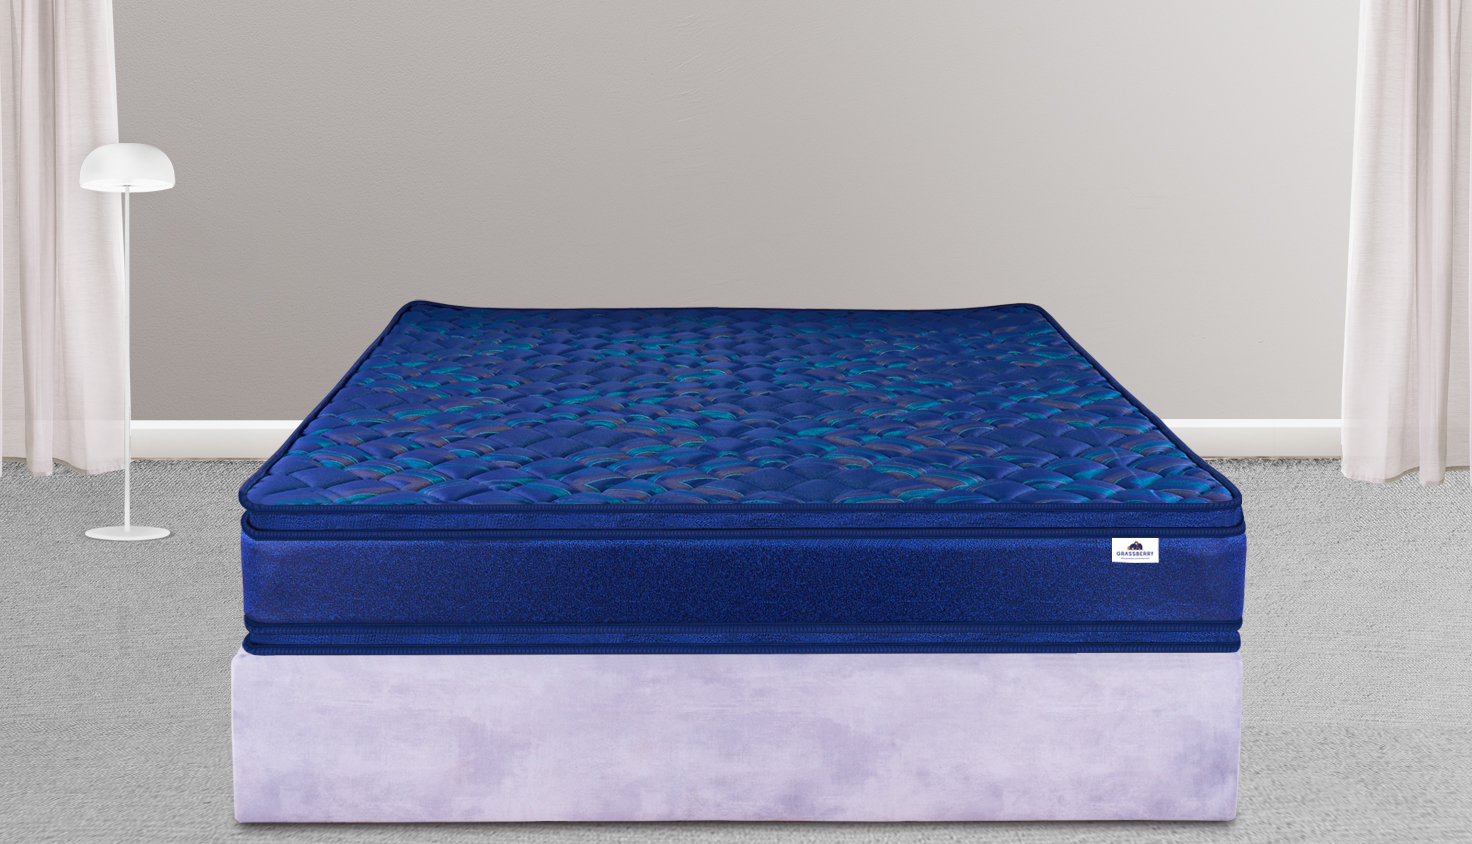 Dual Sided Durable Bonnell Spring PT Mattress